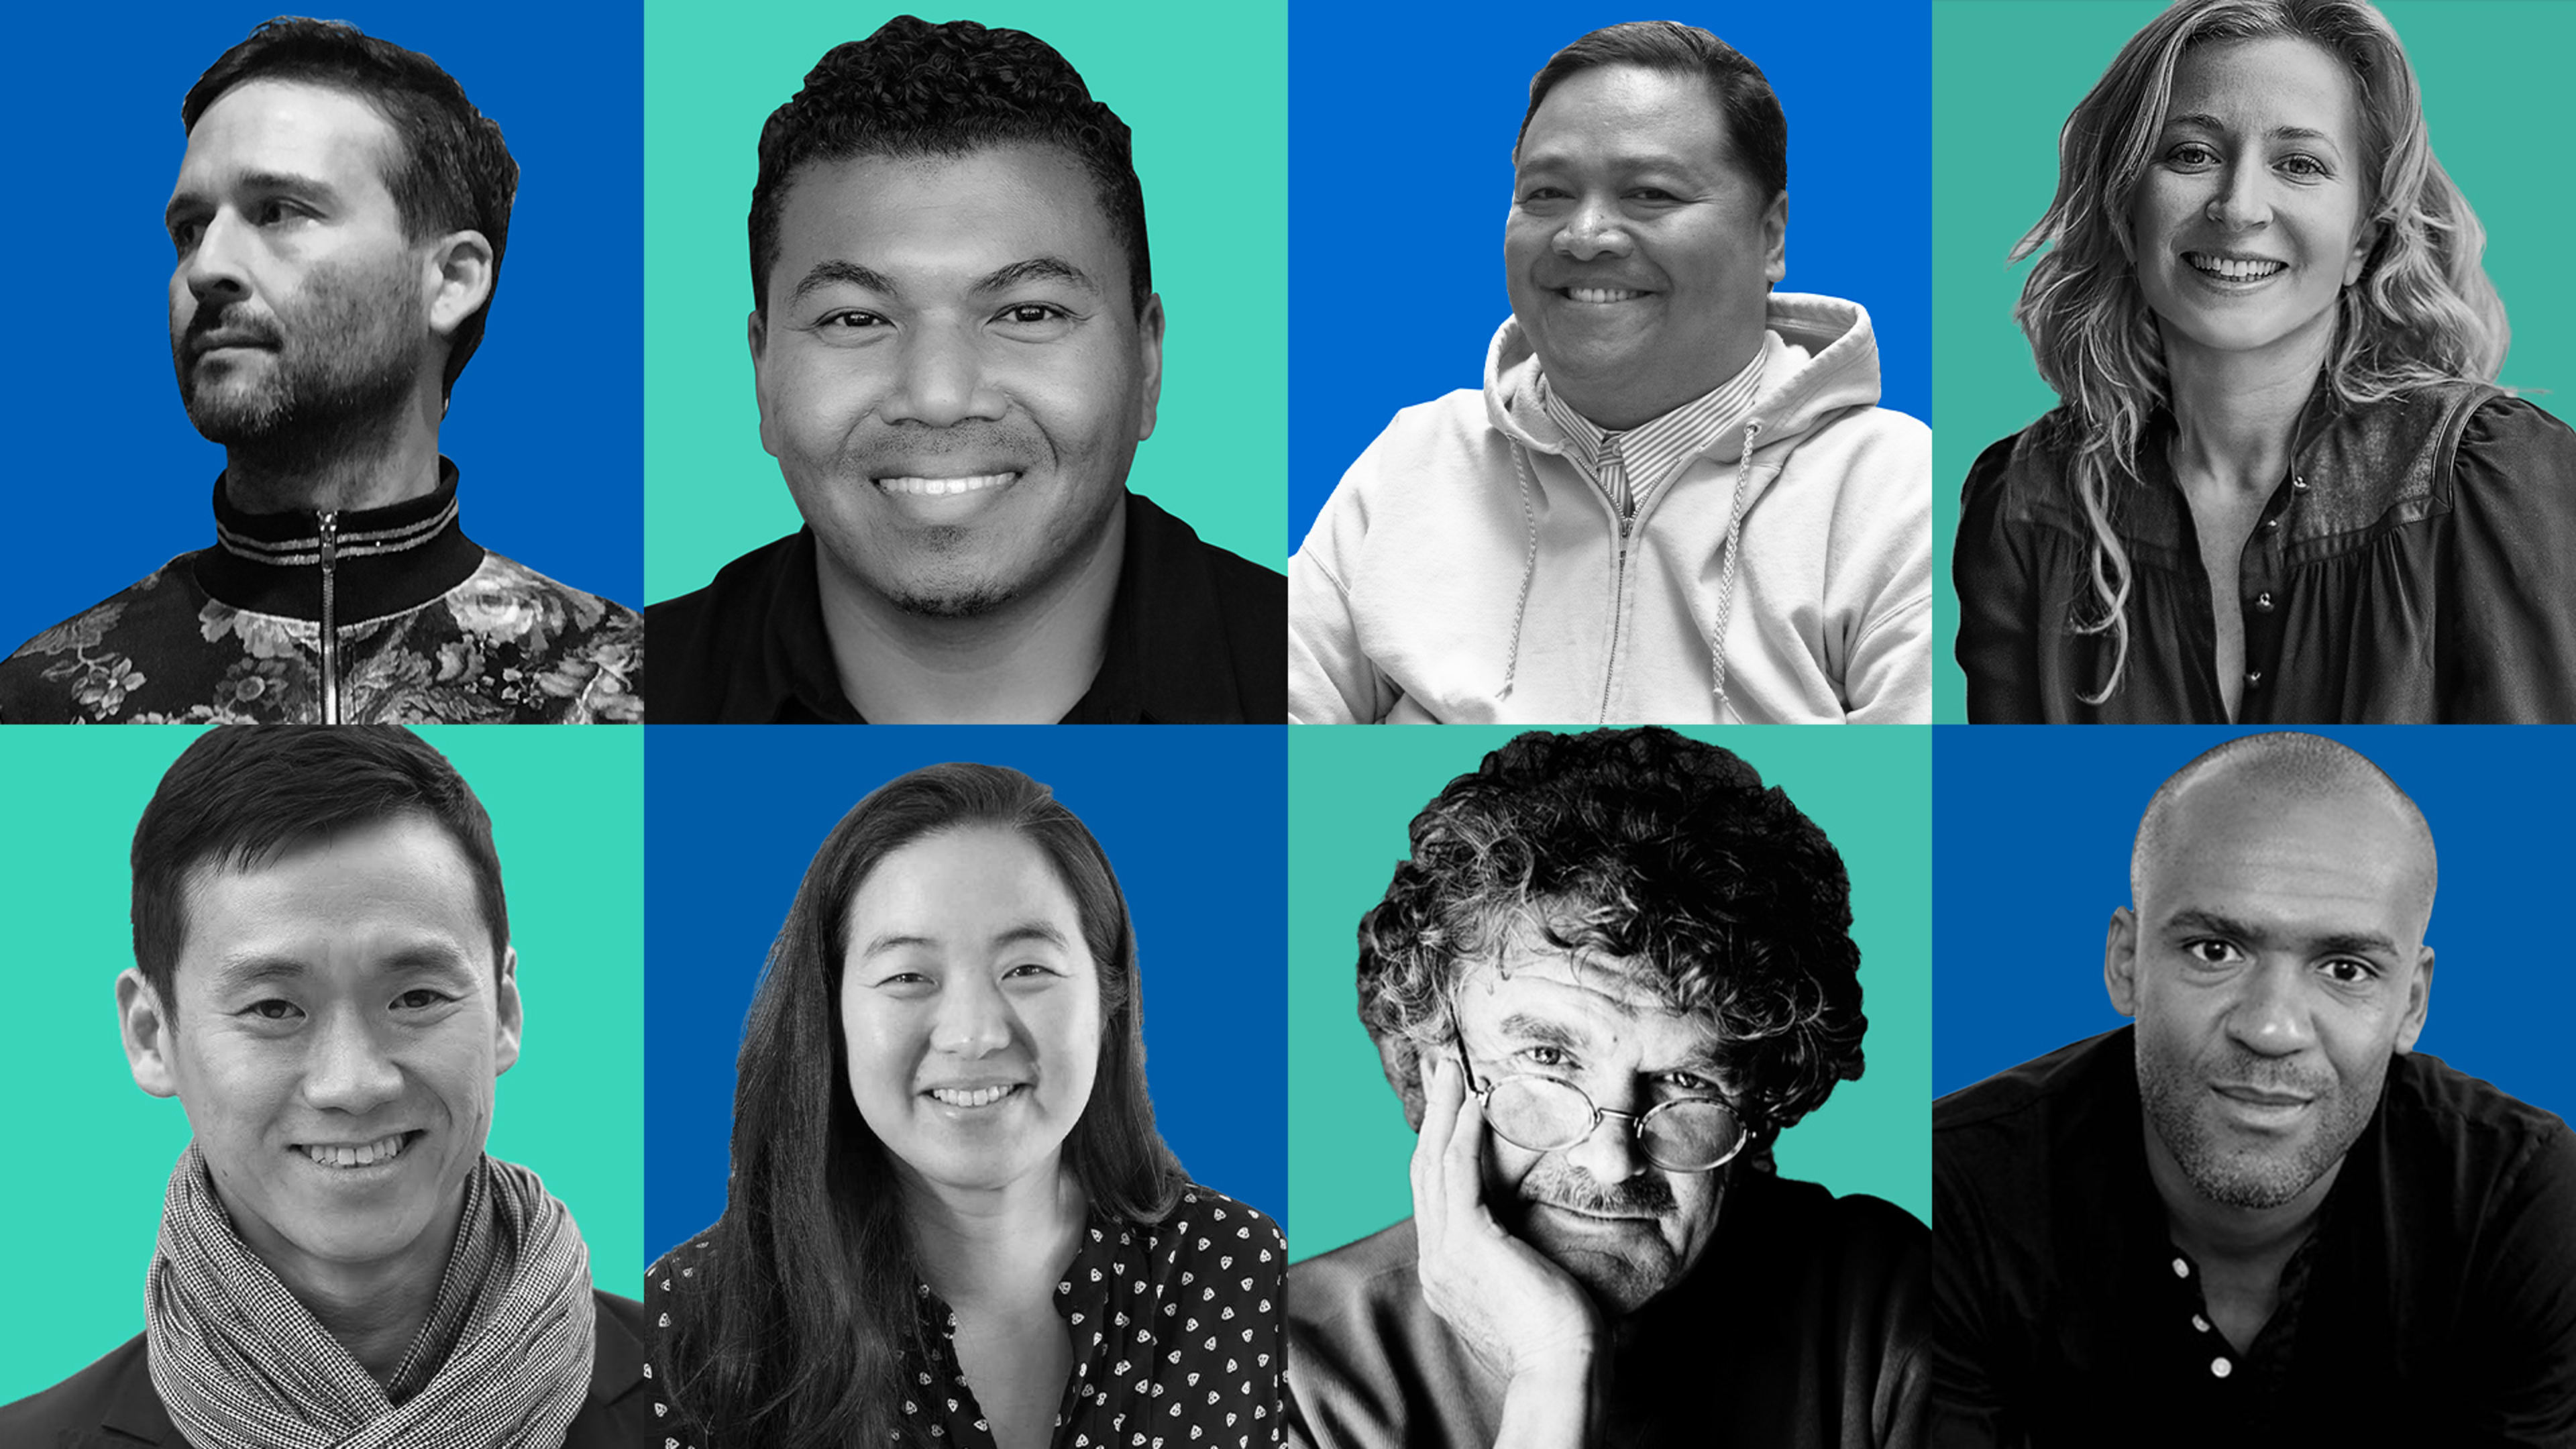 Meet the jury of the 2020 Innovation by Design Awards